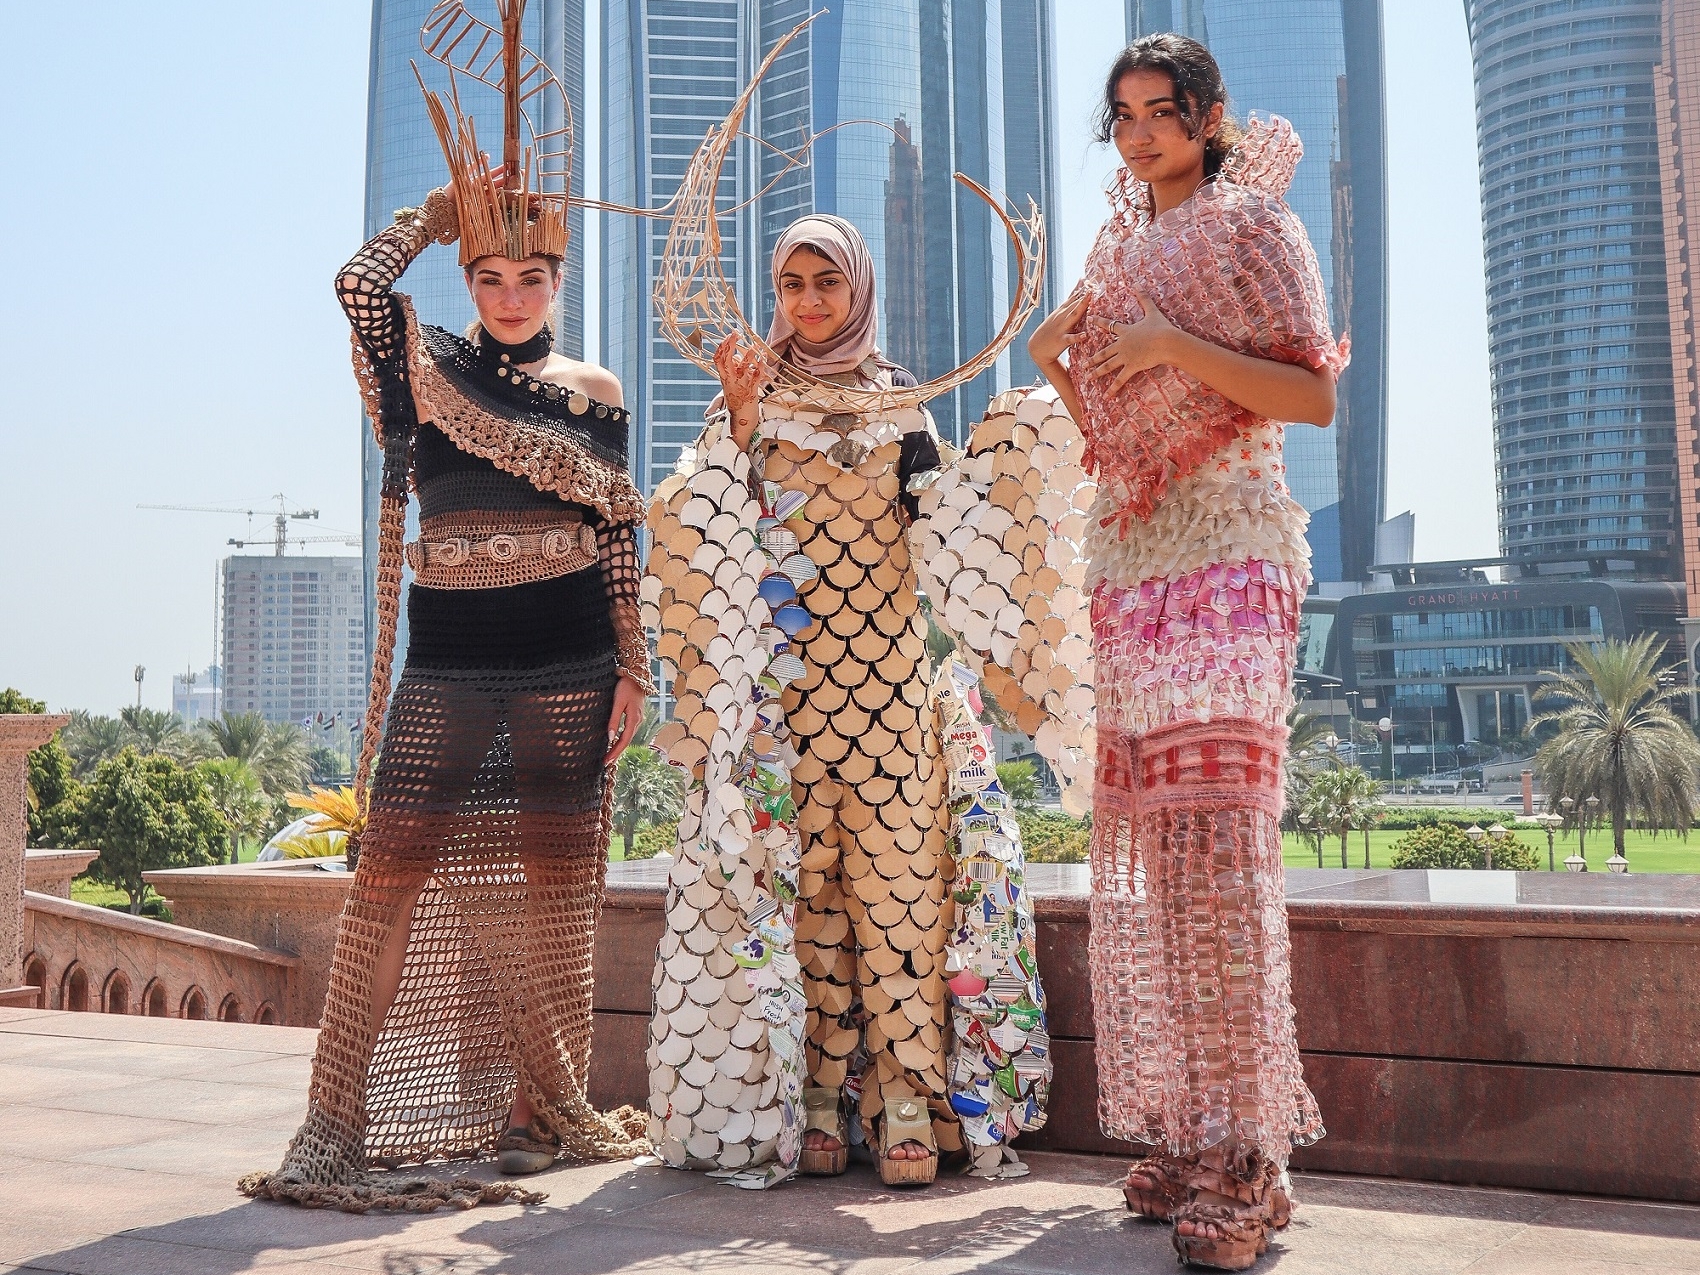 Junk Kouture: the project inspiring children to make fashion out of rubbish